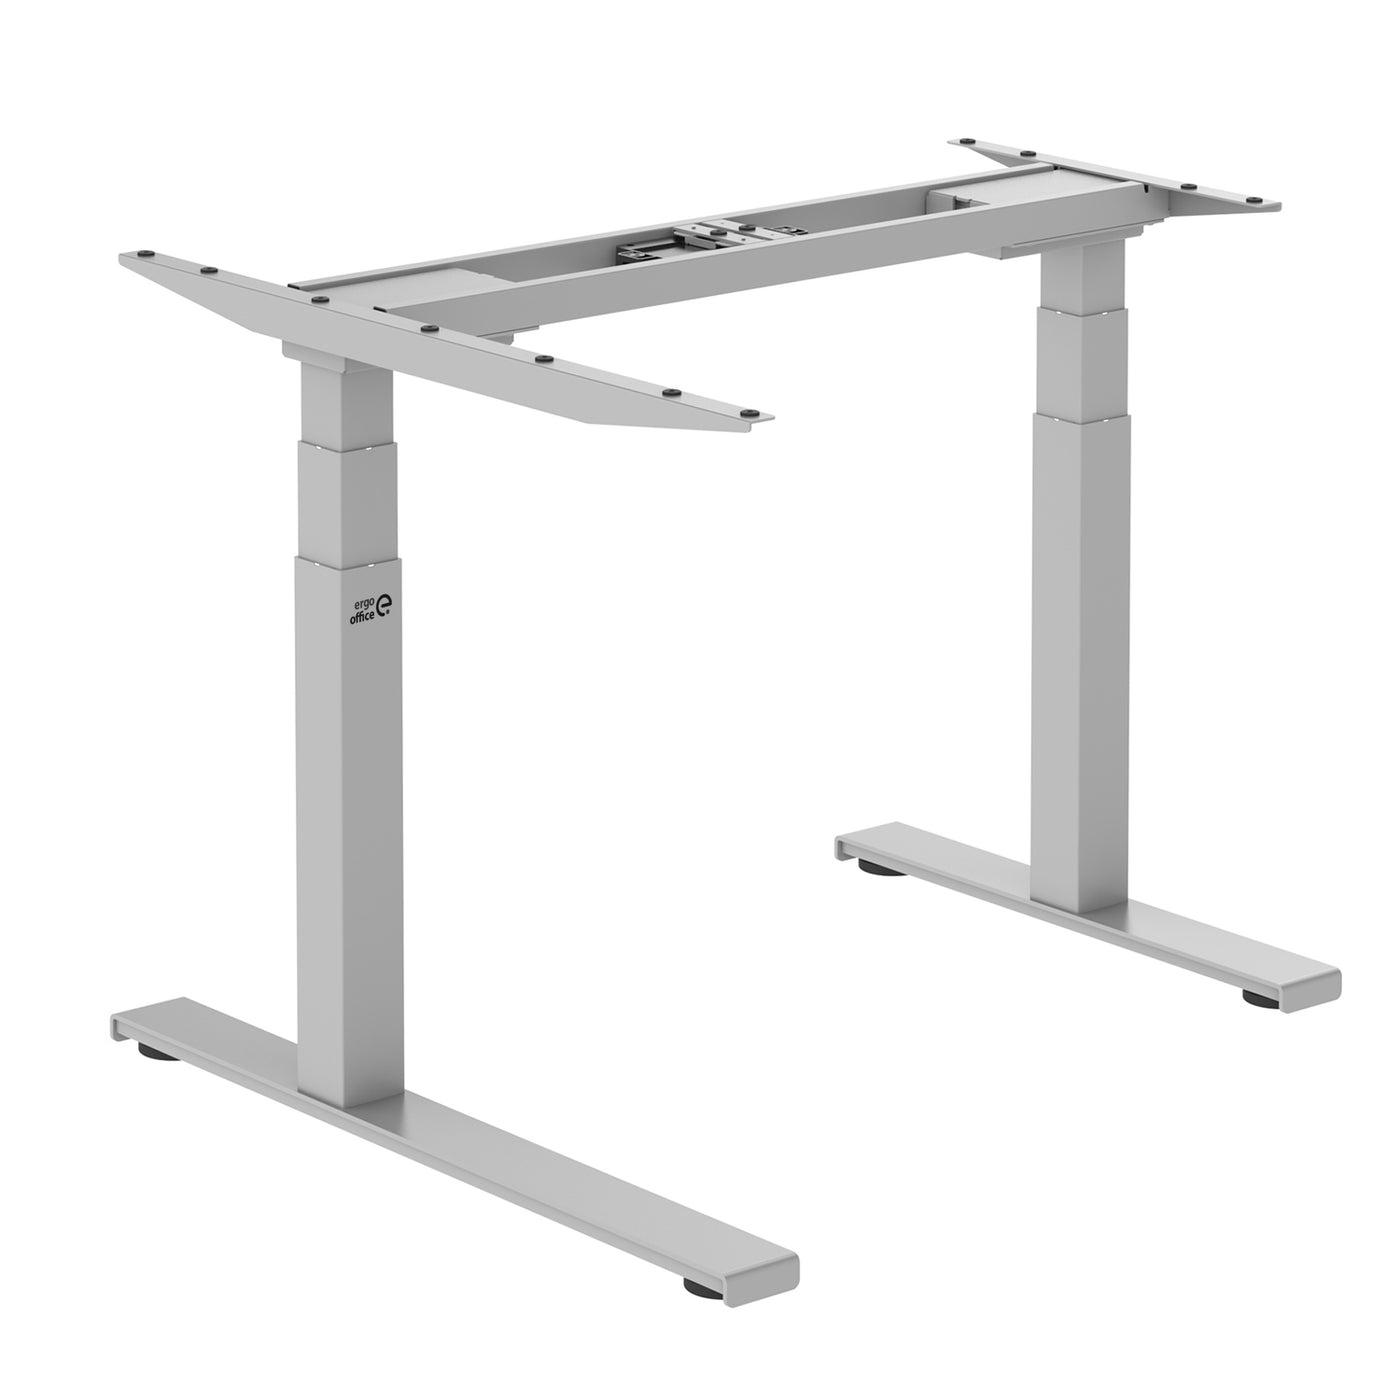 Ergo Office corner electric desk without top, for standing and sitting work, max. 125kg max. height 1280mm, ER-432